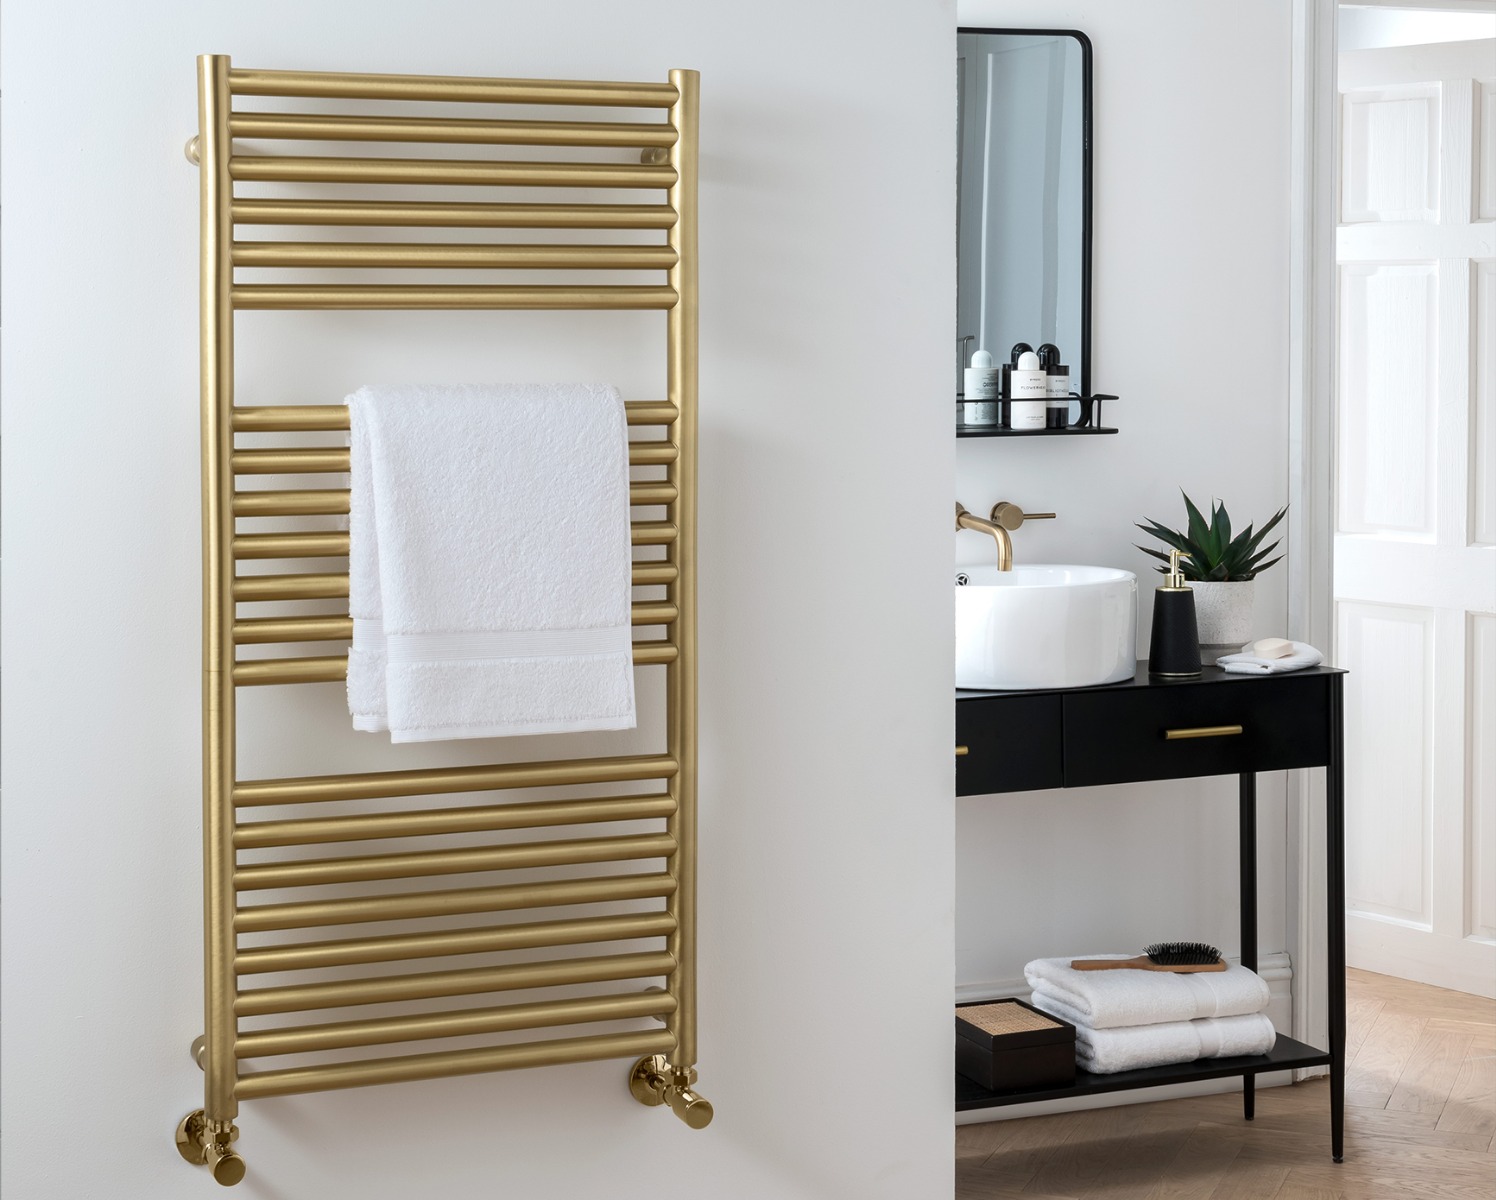 Ladder Rails Studio Dual Energy Only Non-lacquered - Brushed Brass 720x500